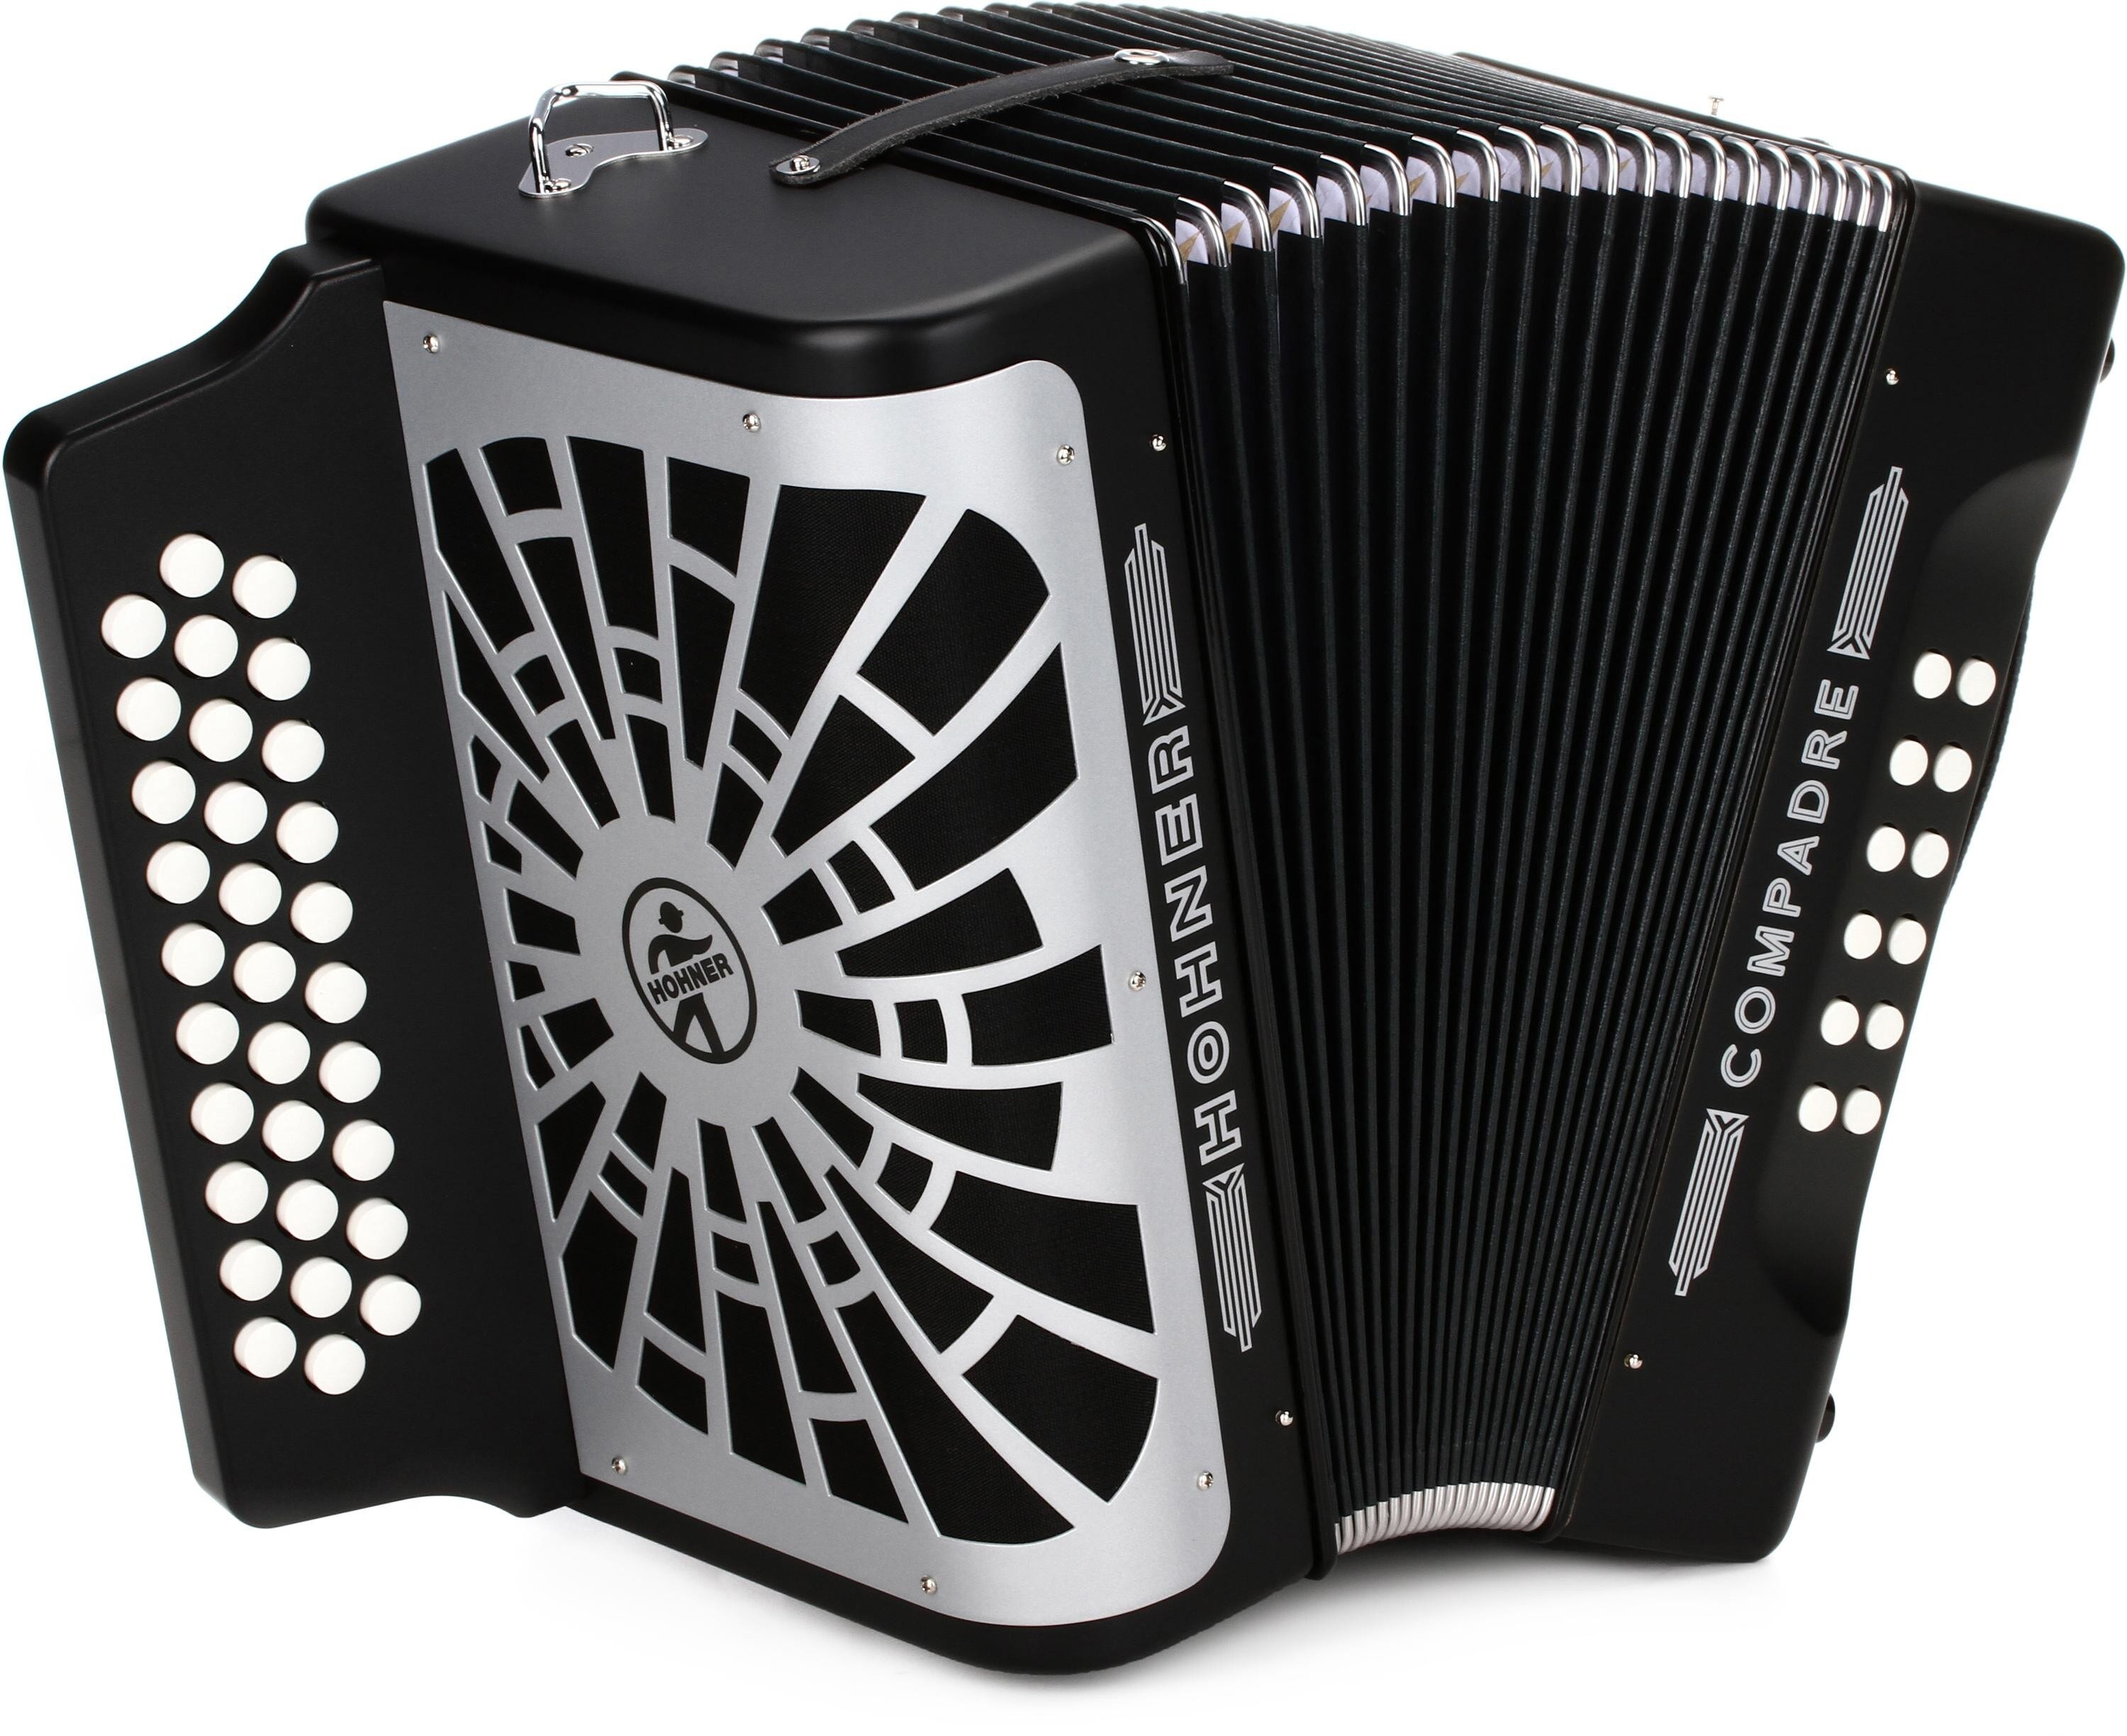 Hohner Compadre Diatonic Accordion - Keys of G/C/F - Black | Sweetwater